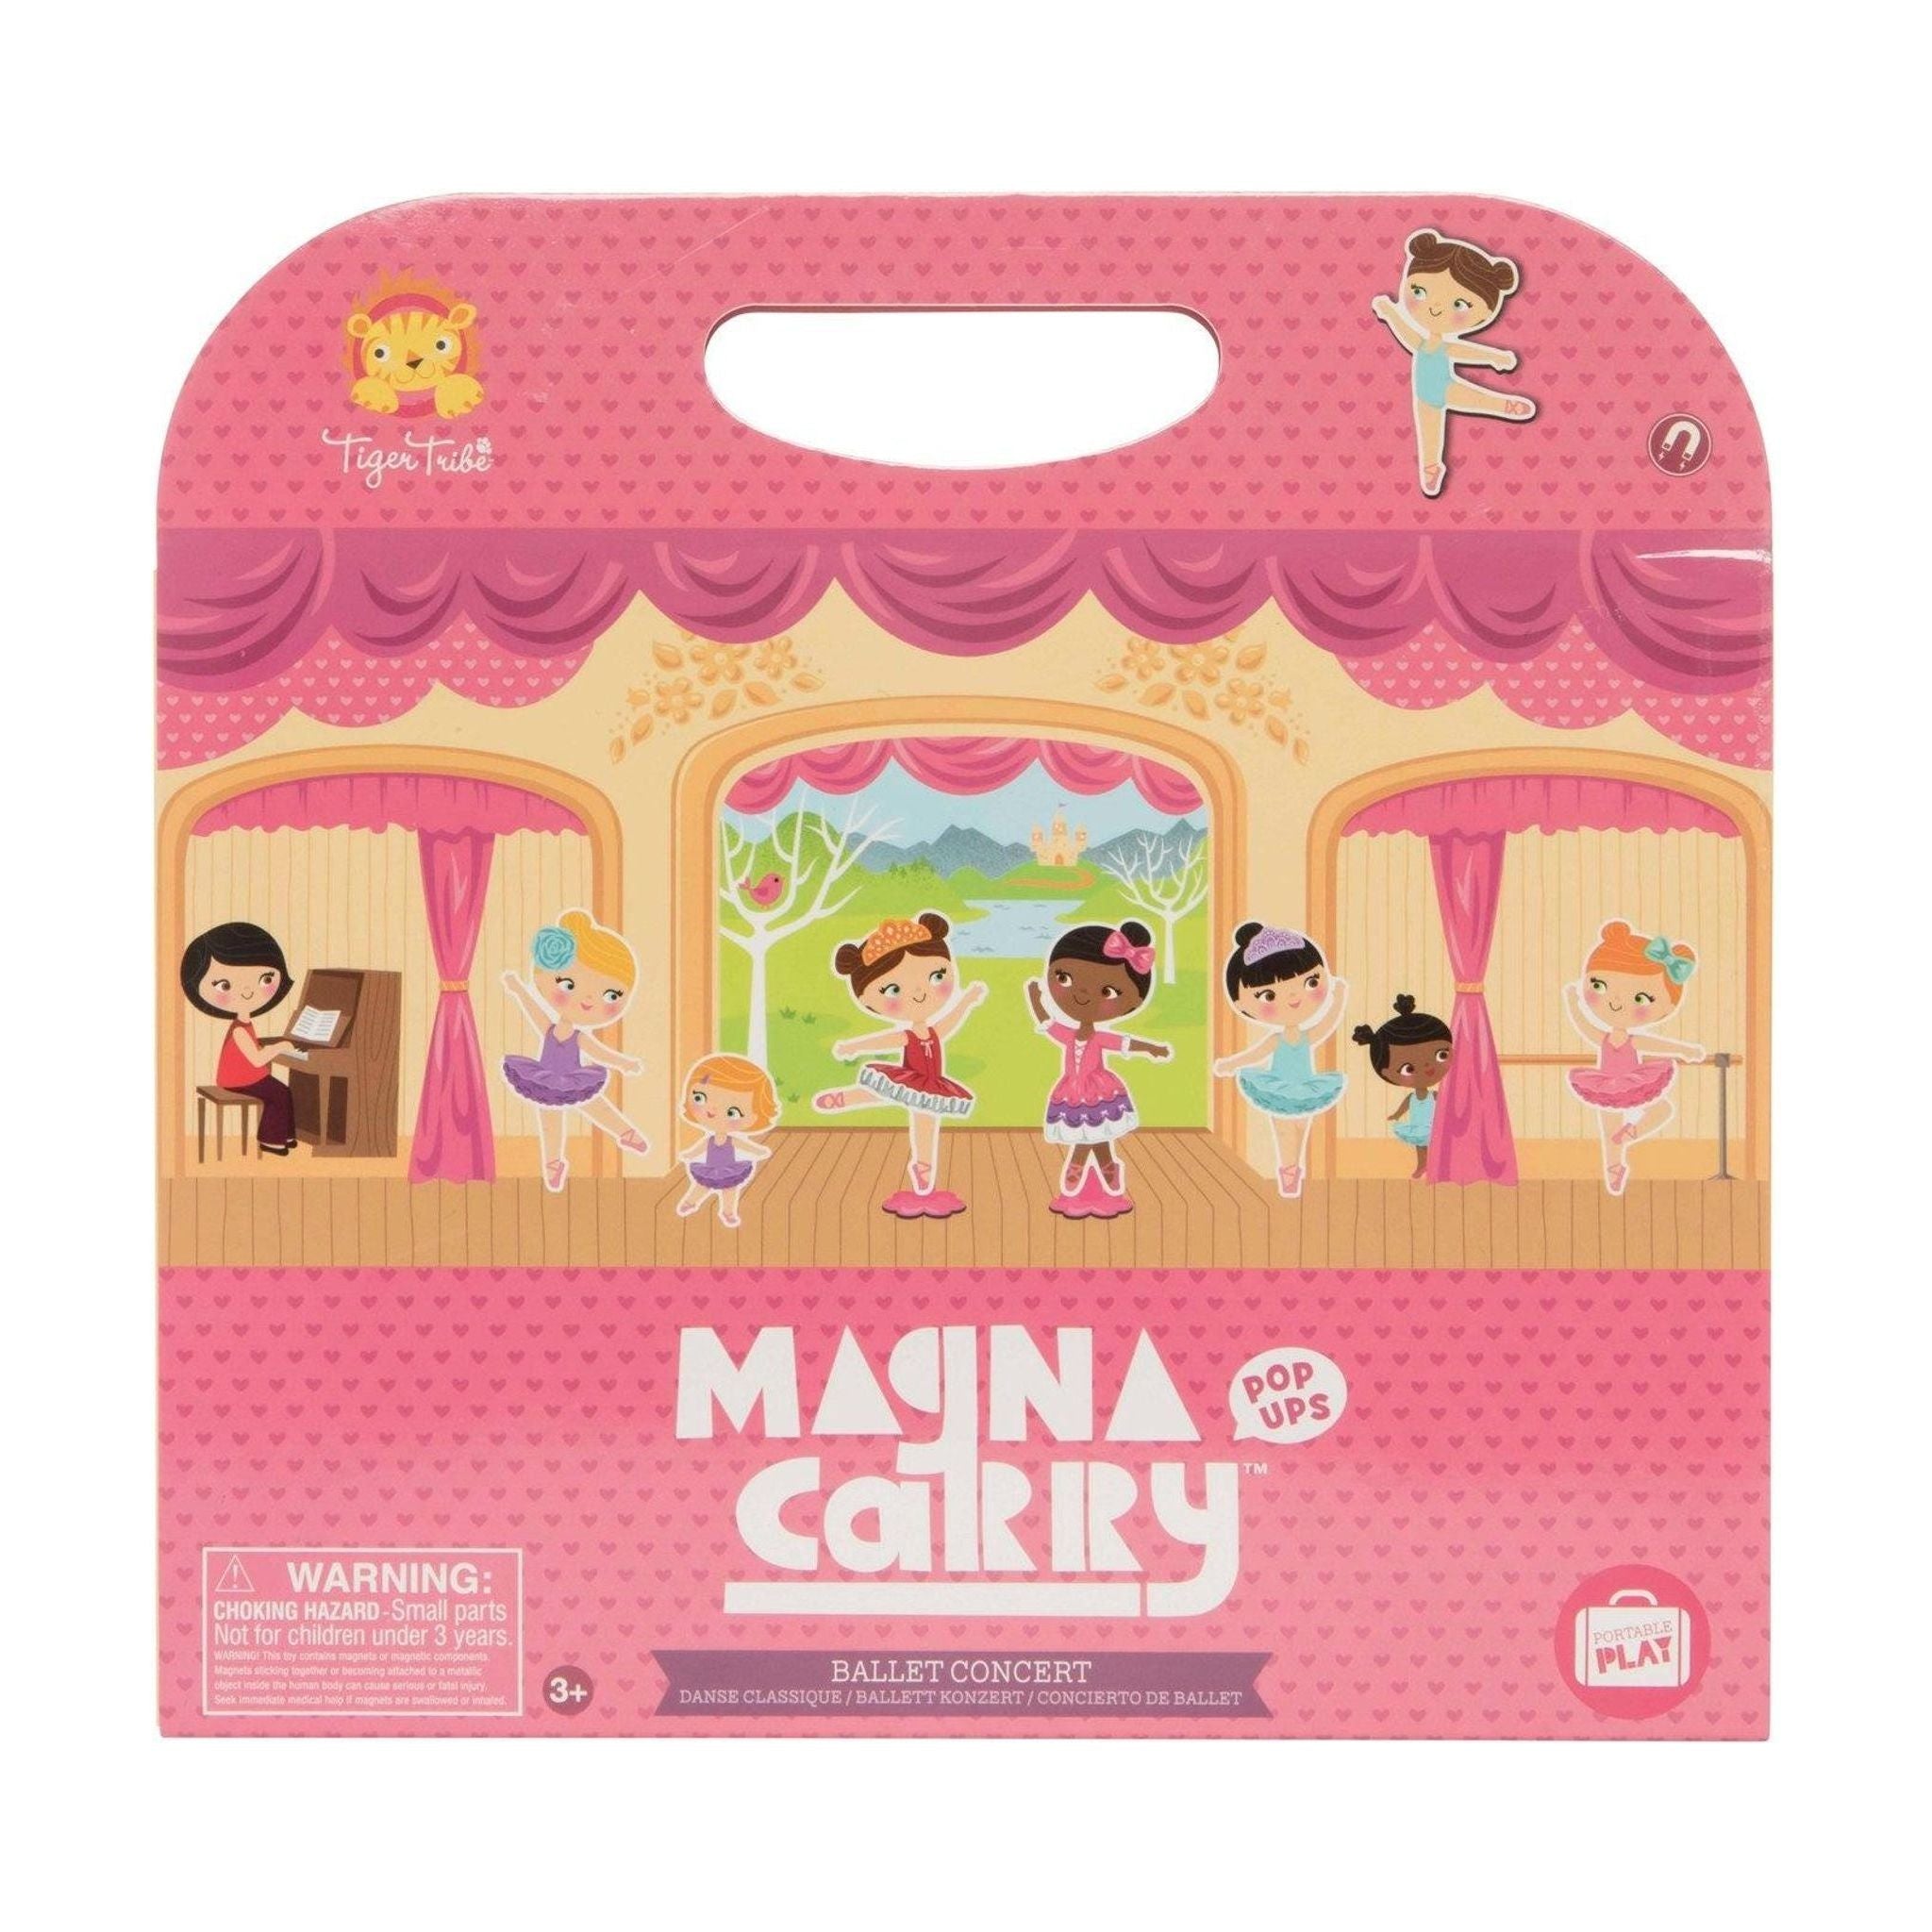 Magna carry ballet concert - Toybox Tales